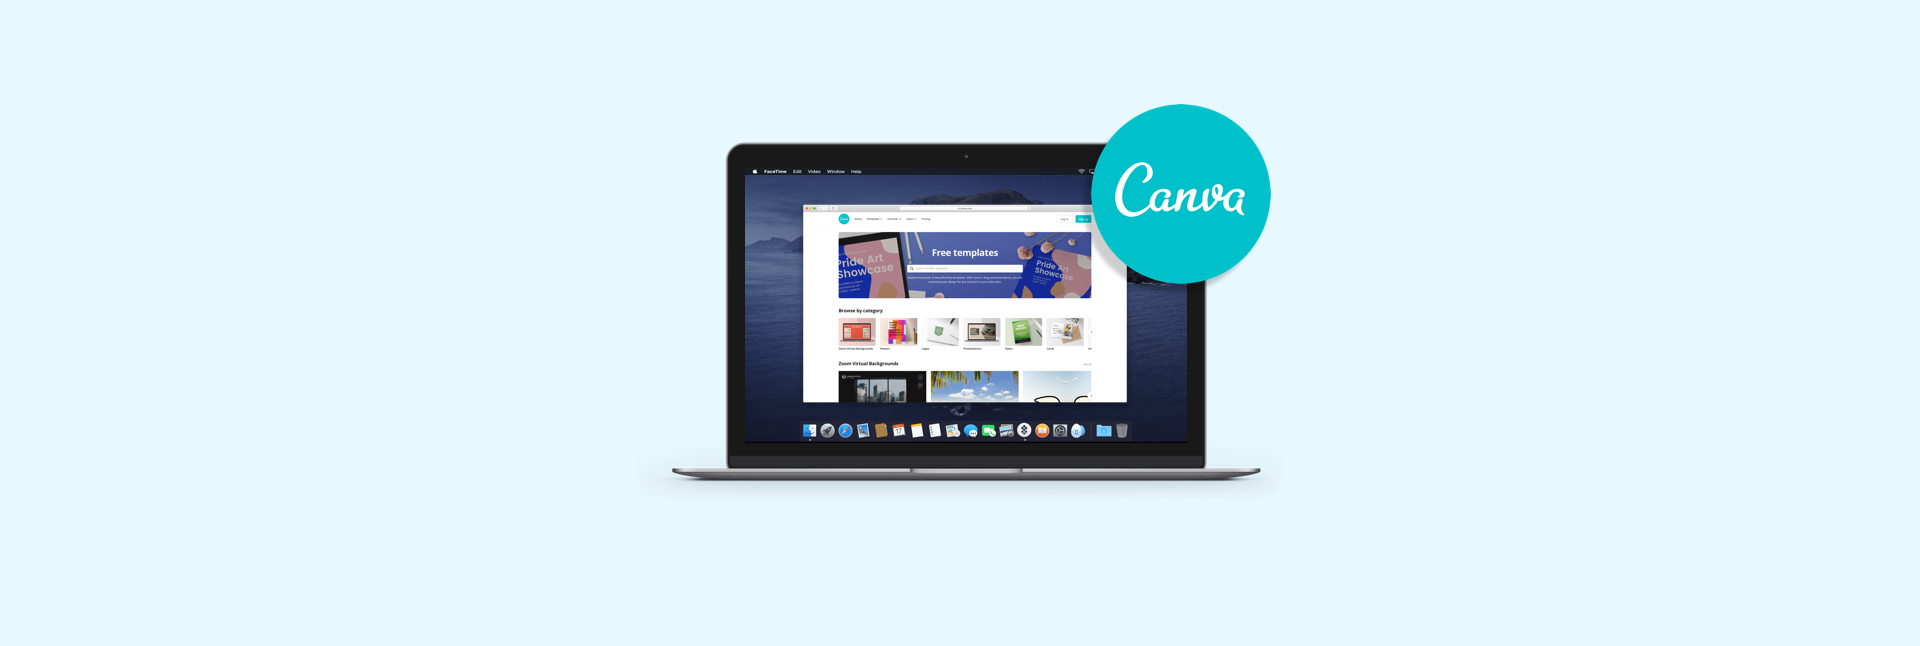 How to Use Canva on Mac - no design experience necessary